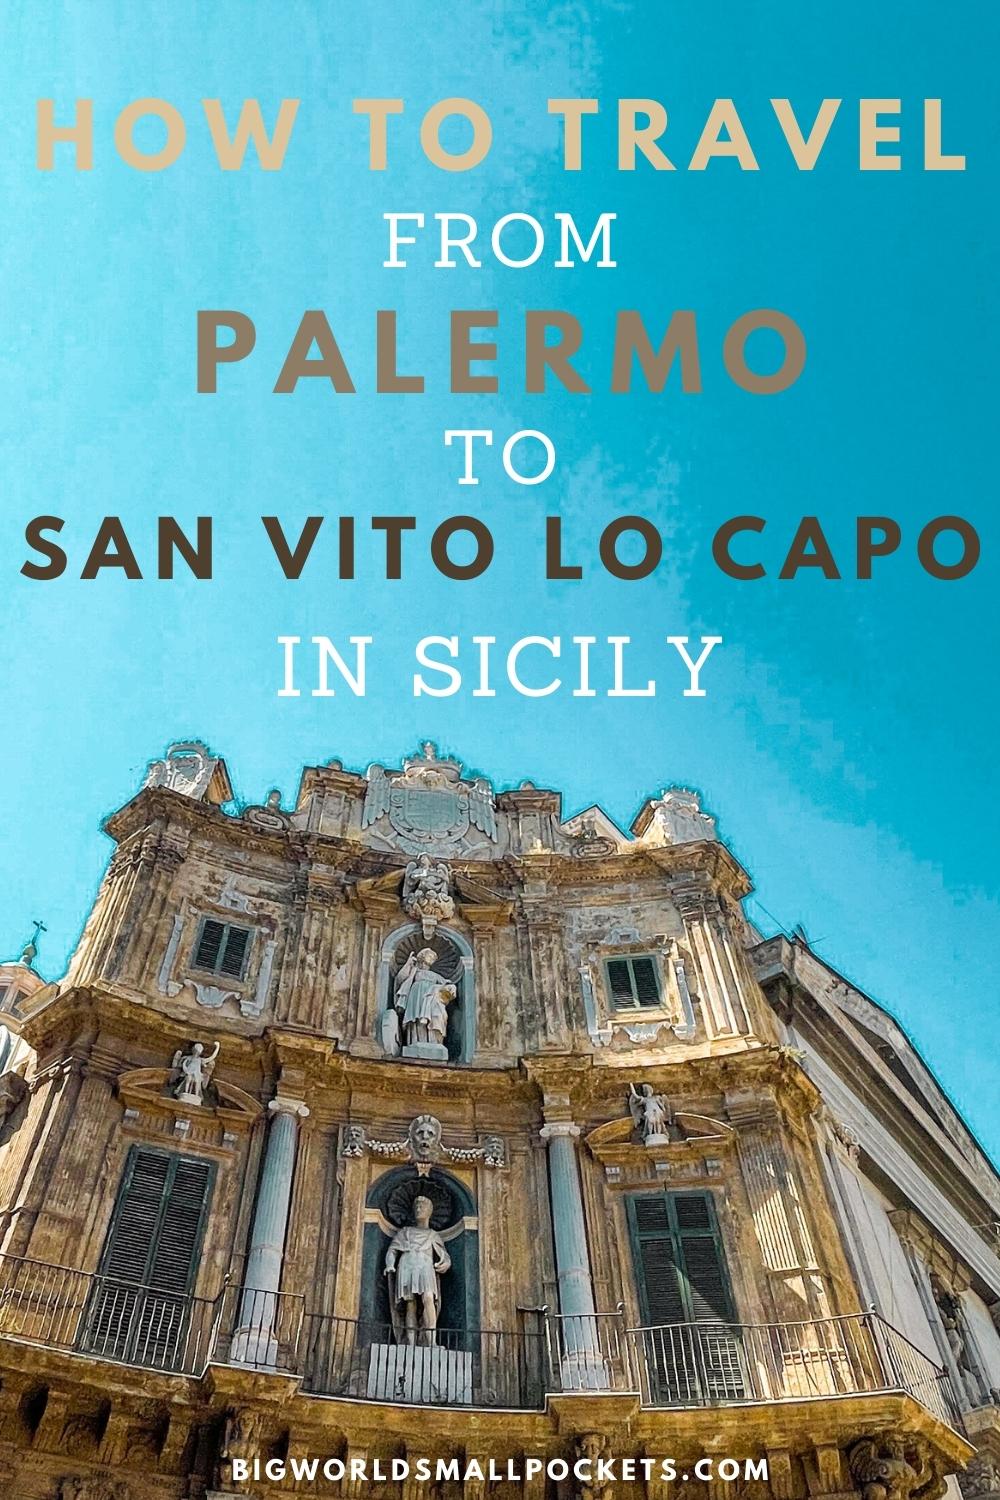 Political bell Influence How to Travel from Palermo to San Vito lo Capo - Big World Small Pockets